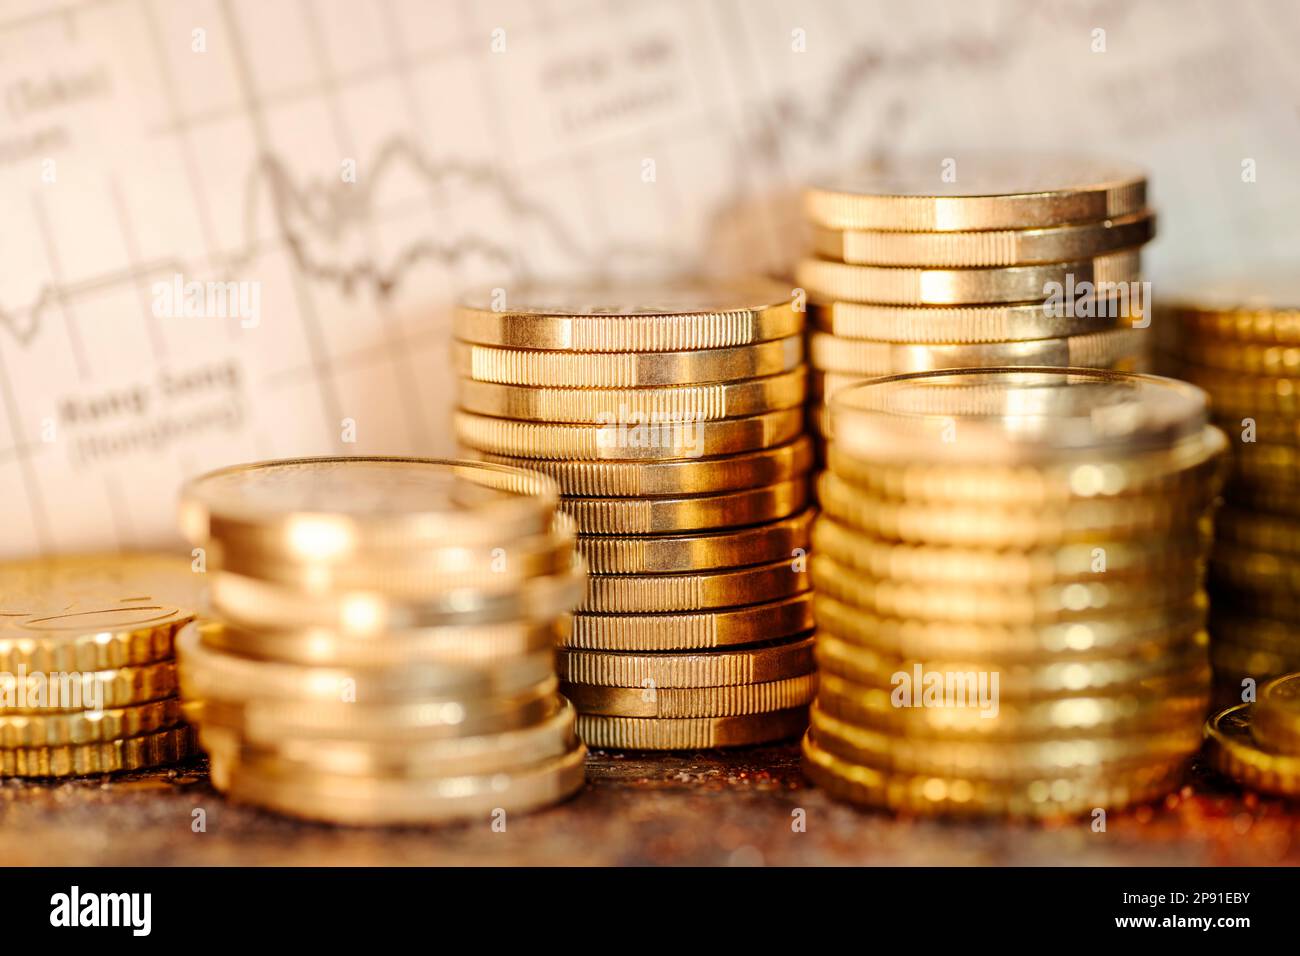 Several stacks of coins and chart with stock market prices. High profits on the international stock exchanges Stock Photo